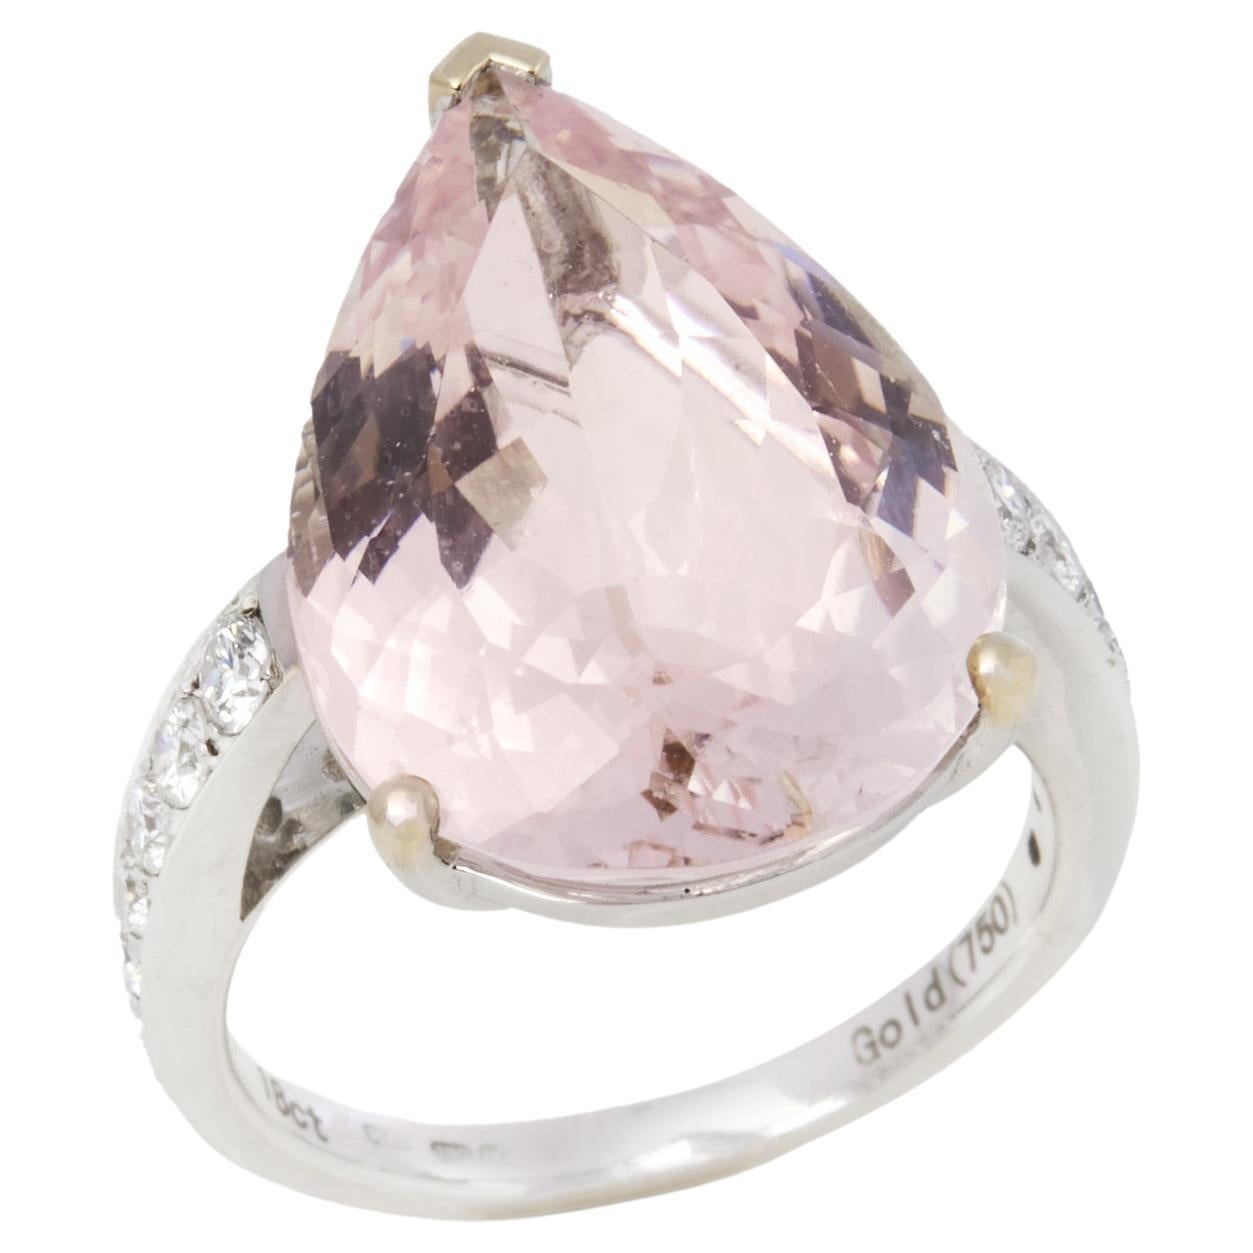 David Jerome Certified 12.24ct Pear Cut Morganite and Diamond Ring For Sale